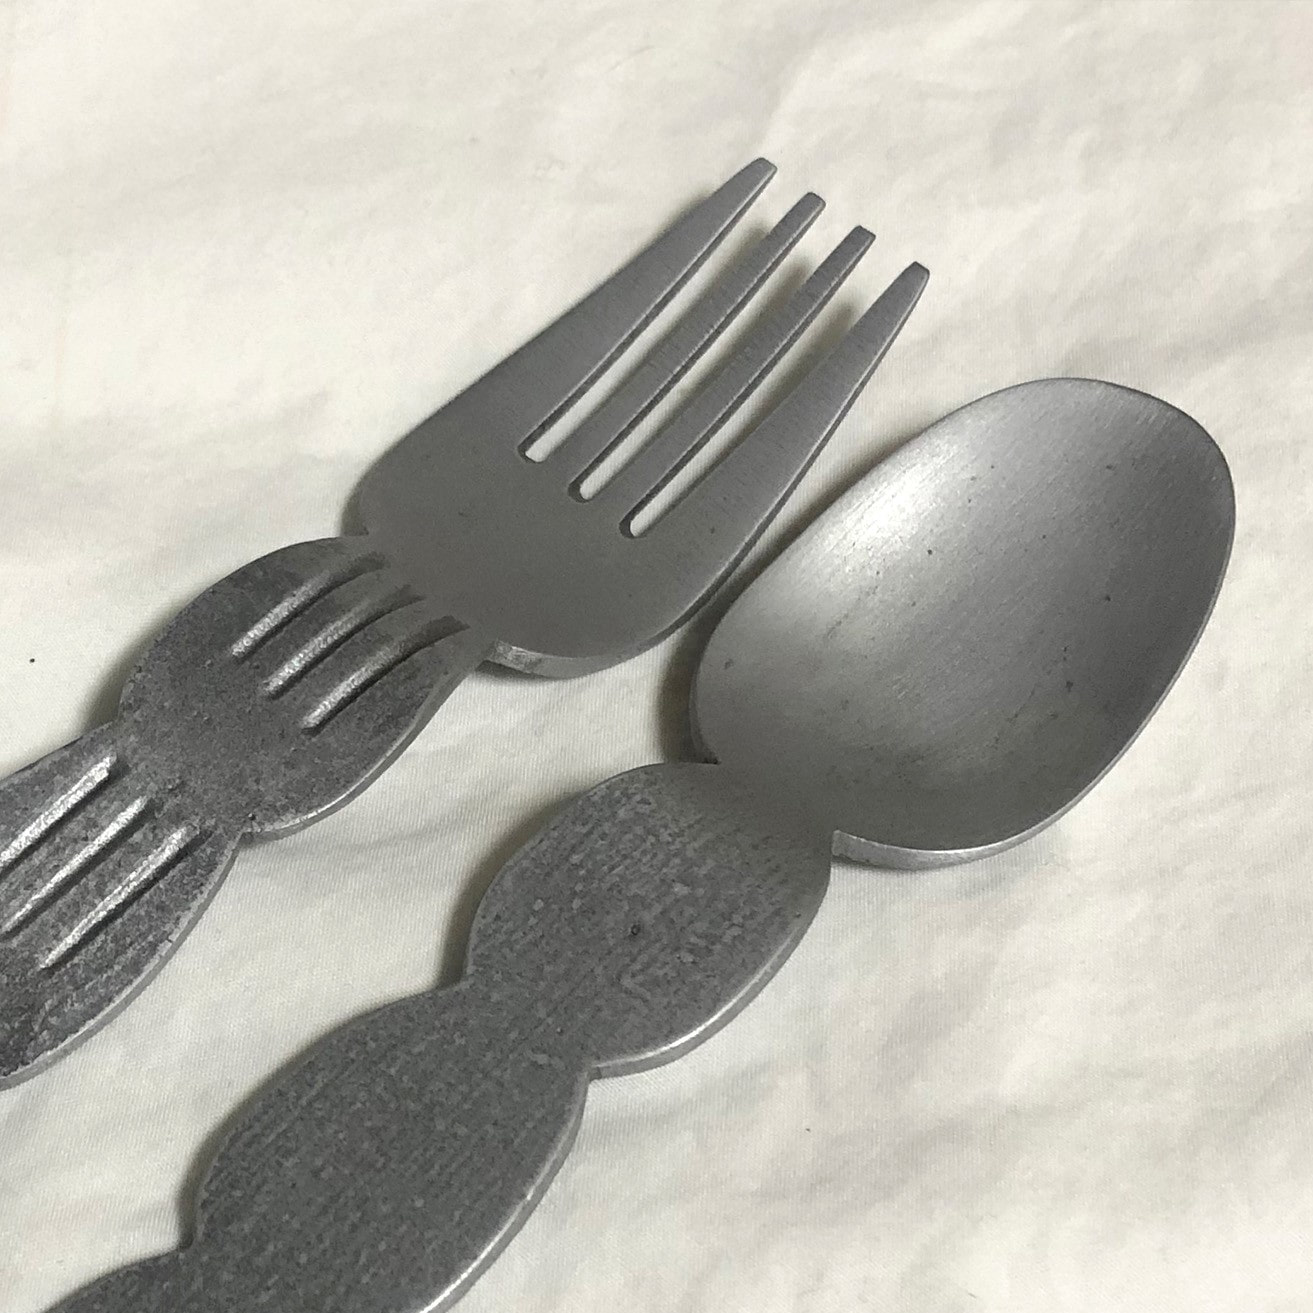 [Liberal Office] OBVI Cutlery Set